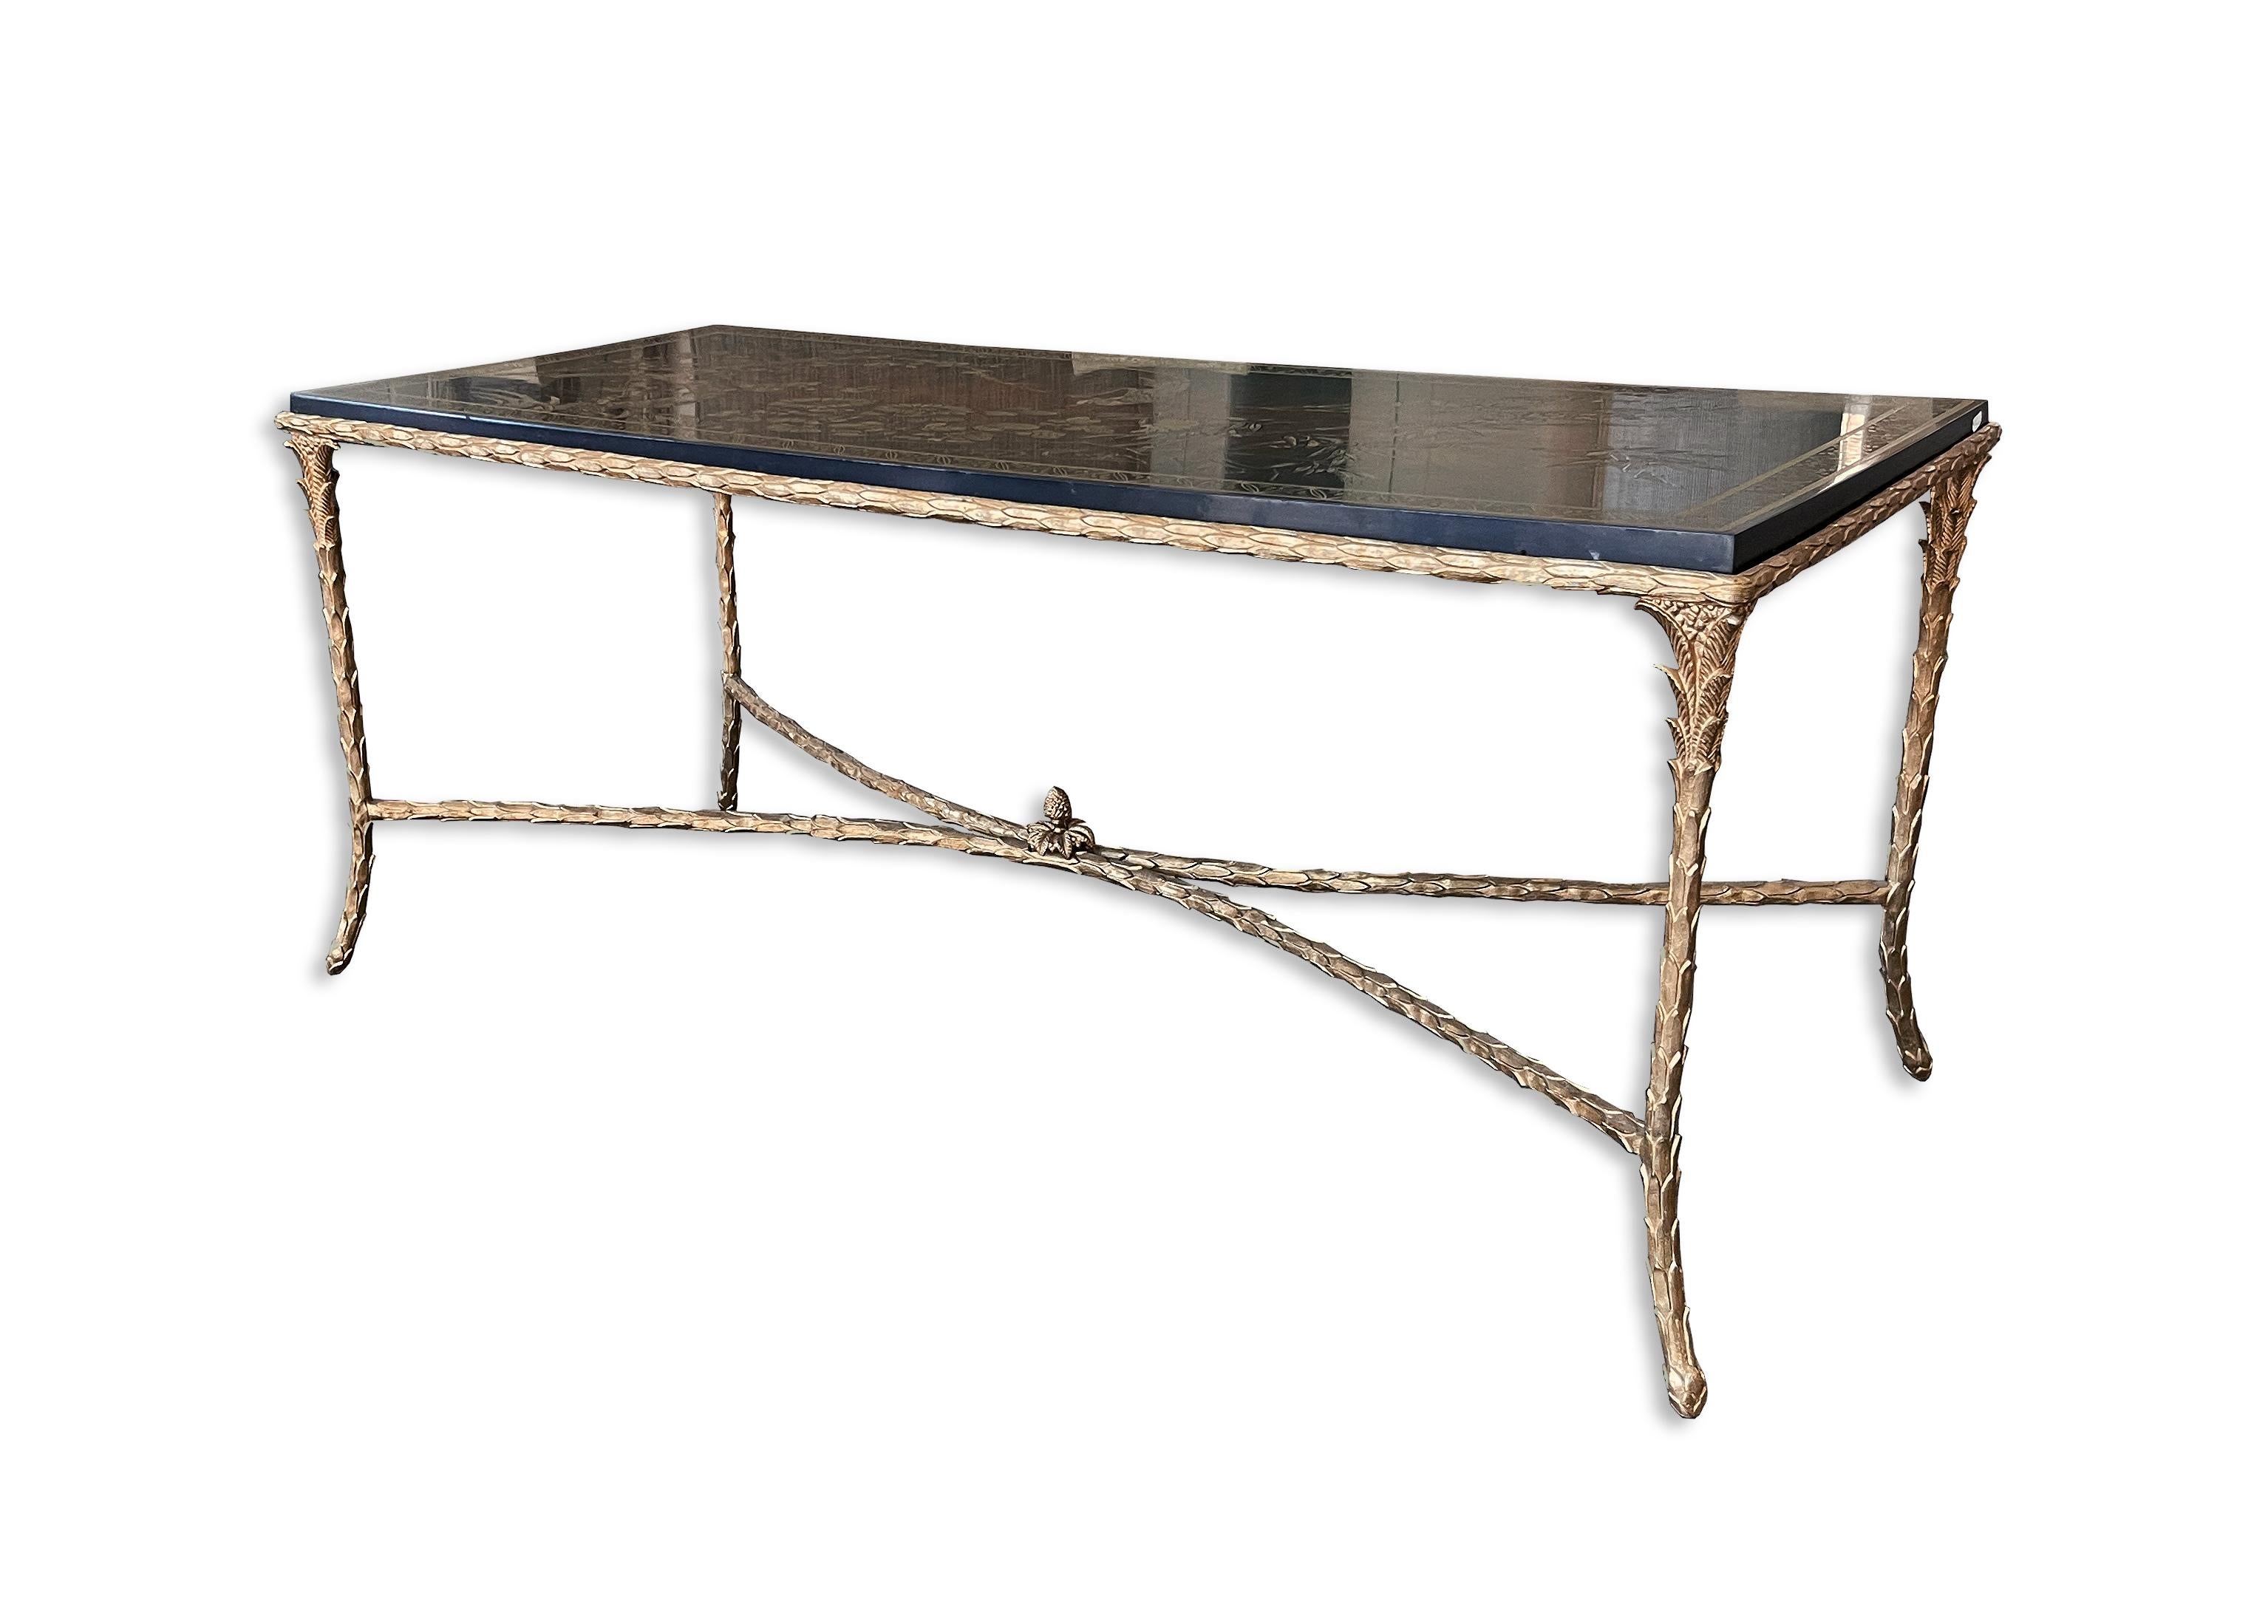 Maison Charles, Circa 1960,s

This very elegant Maison Charles coffee table is in its original condition; It has a gilt bronze, palm trunk motif frame and a beautiful dark brown lacquered top with a Asian decor of a bird on a branch. The feet on